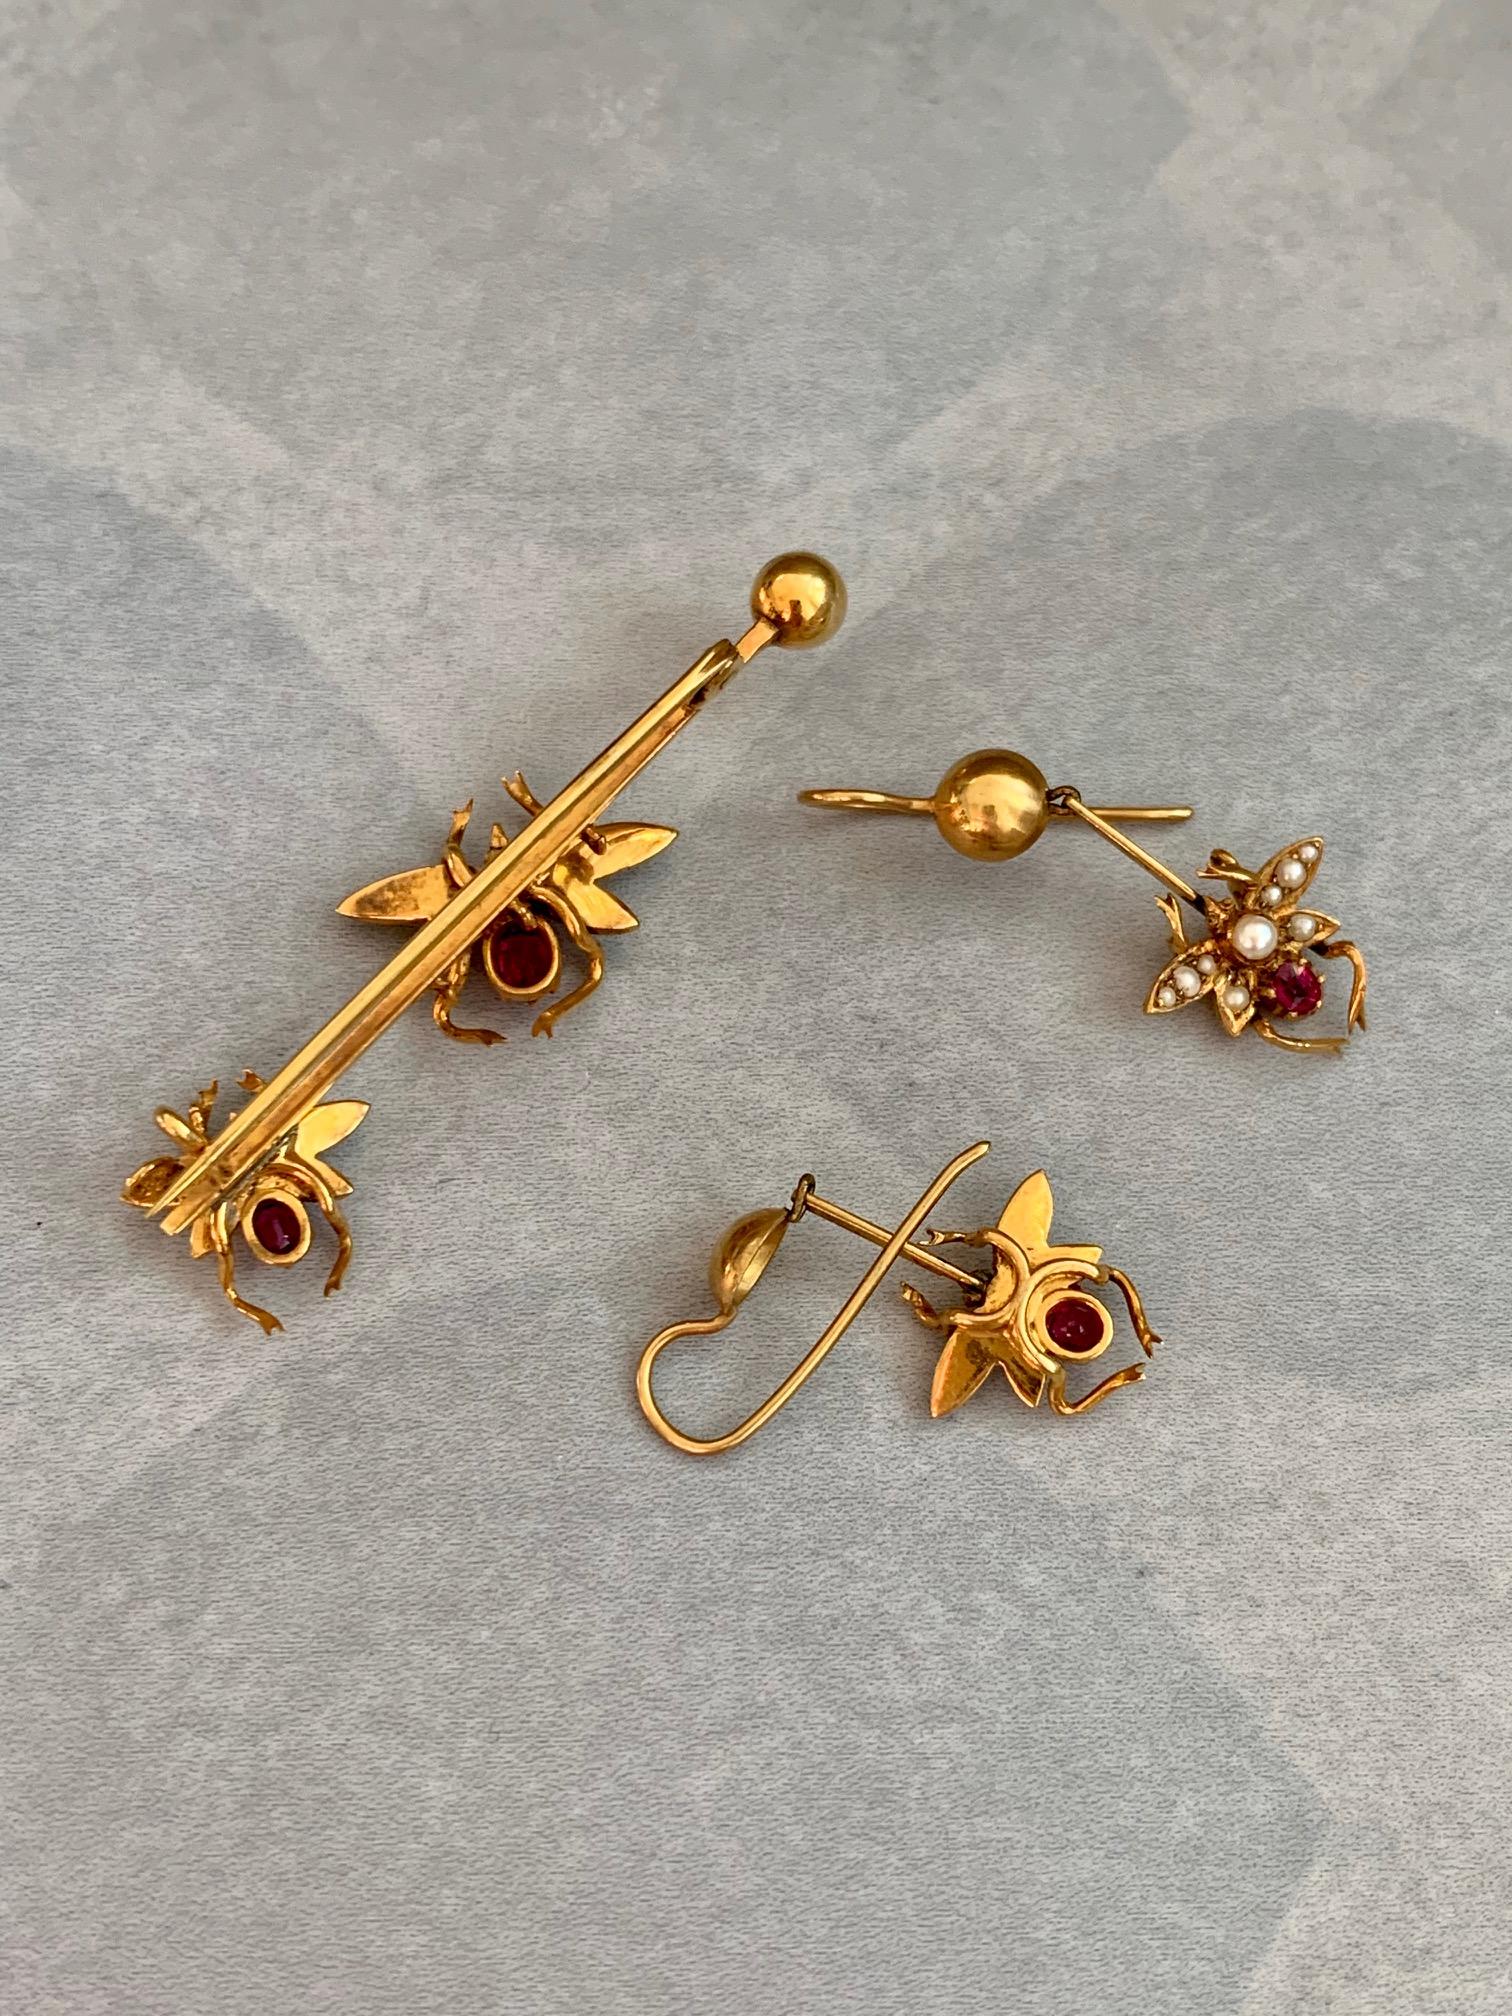 Vintage Gold Insect Pin and Earring Set 1